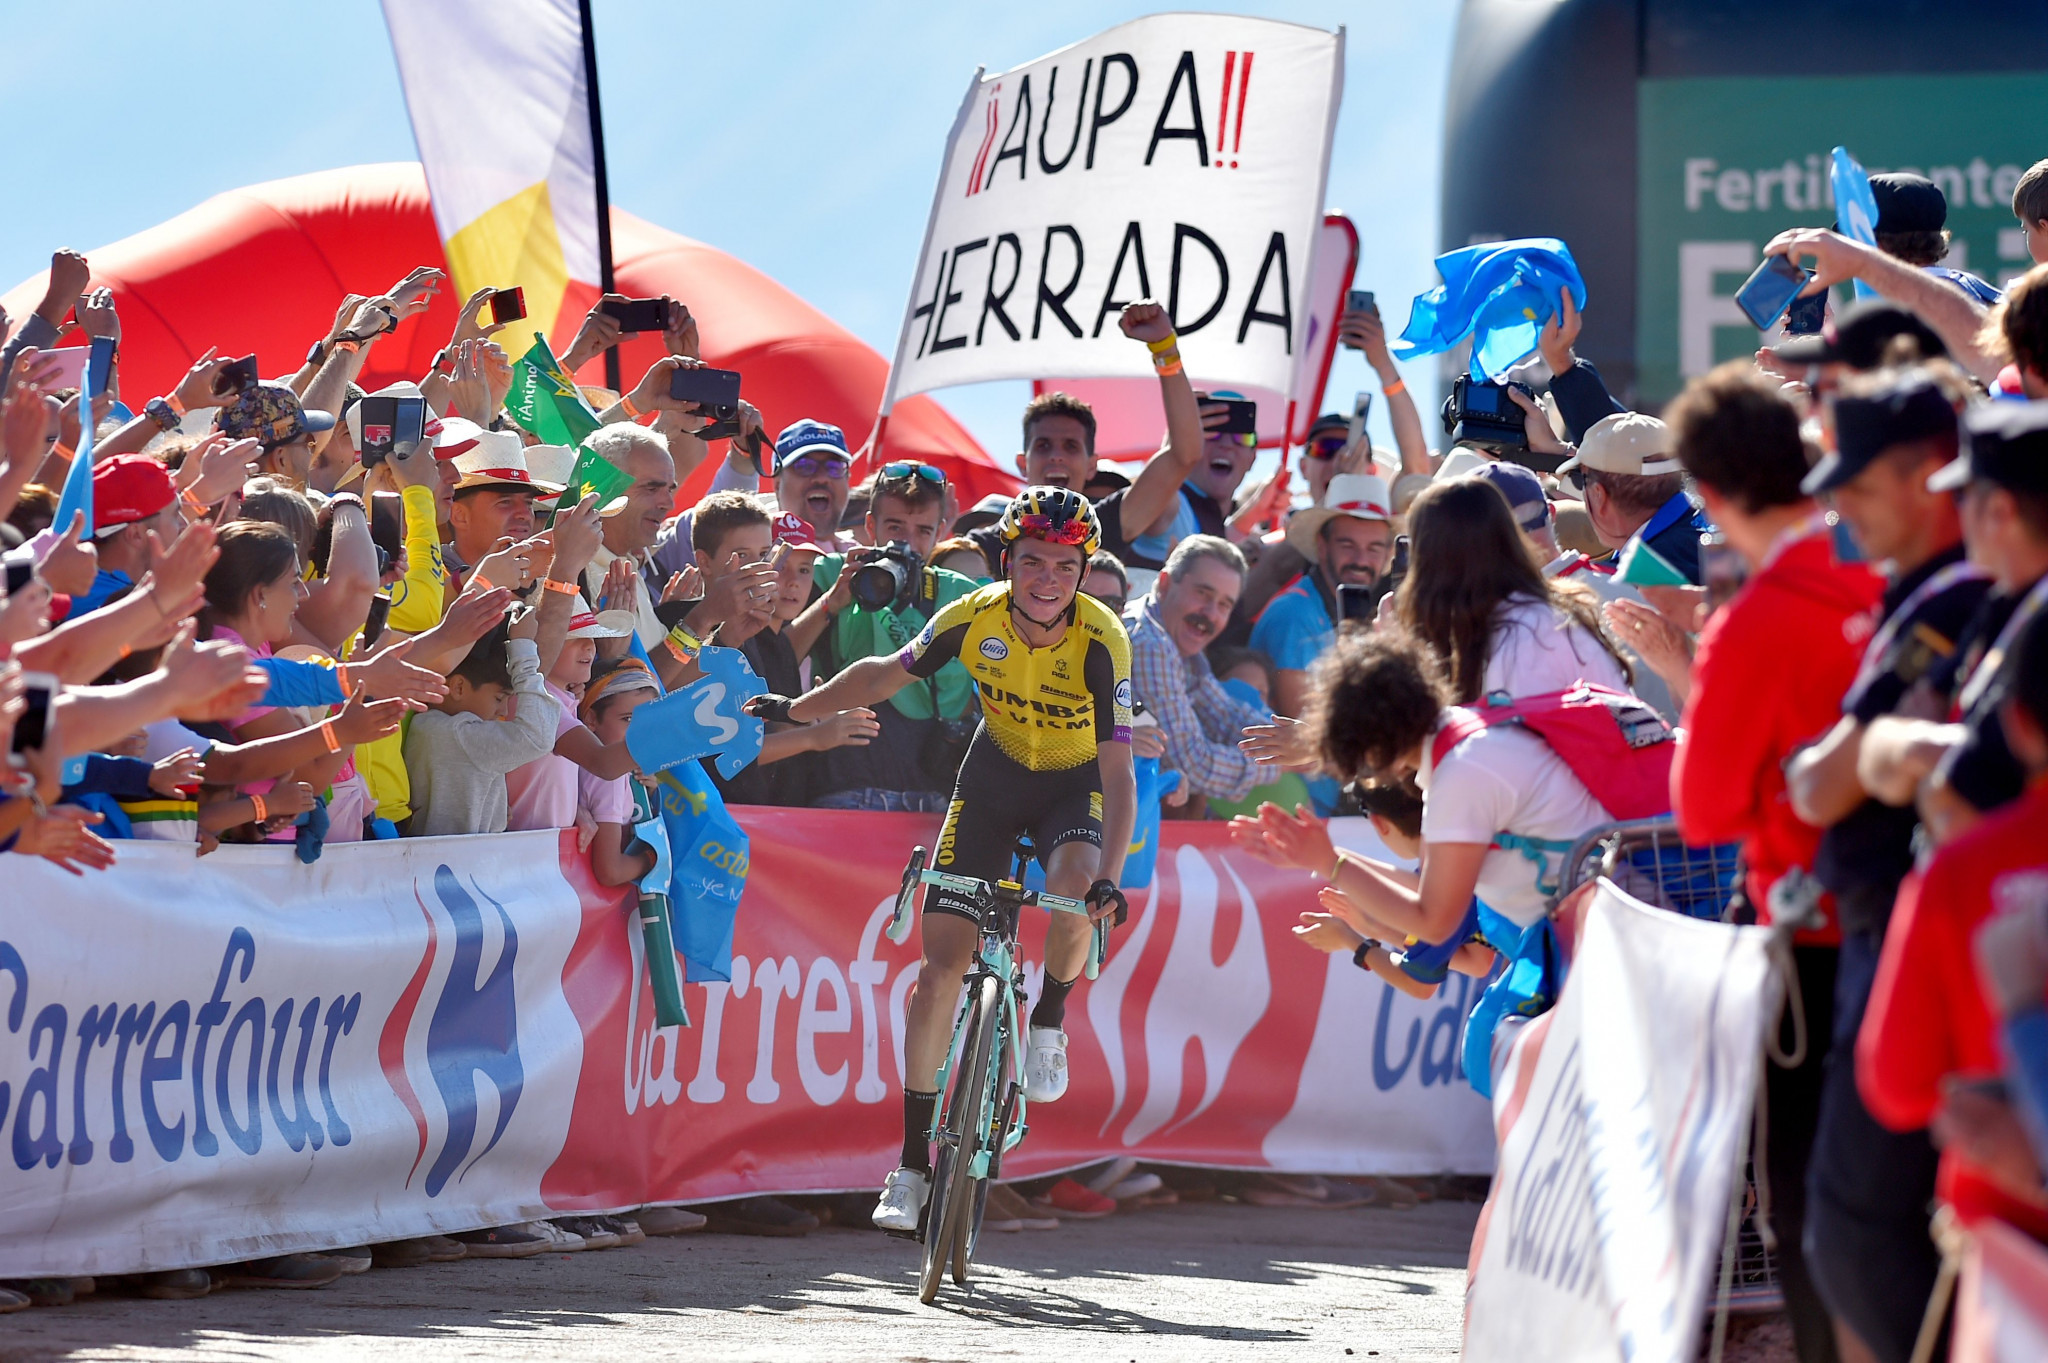 Kuss clinches stage 15 win at Vuelta a España as Roglic and Valverde gain time